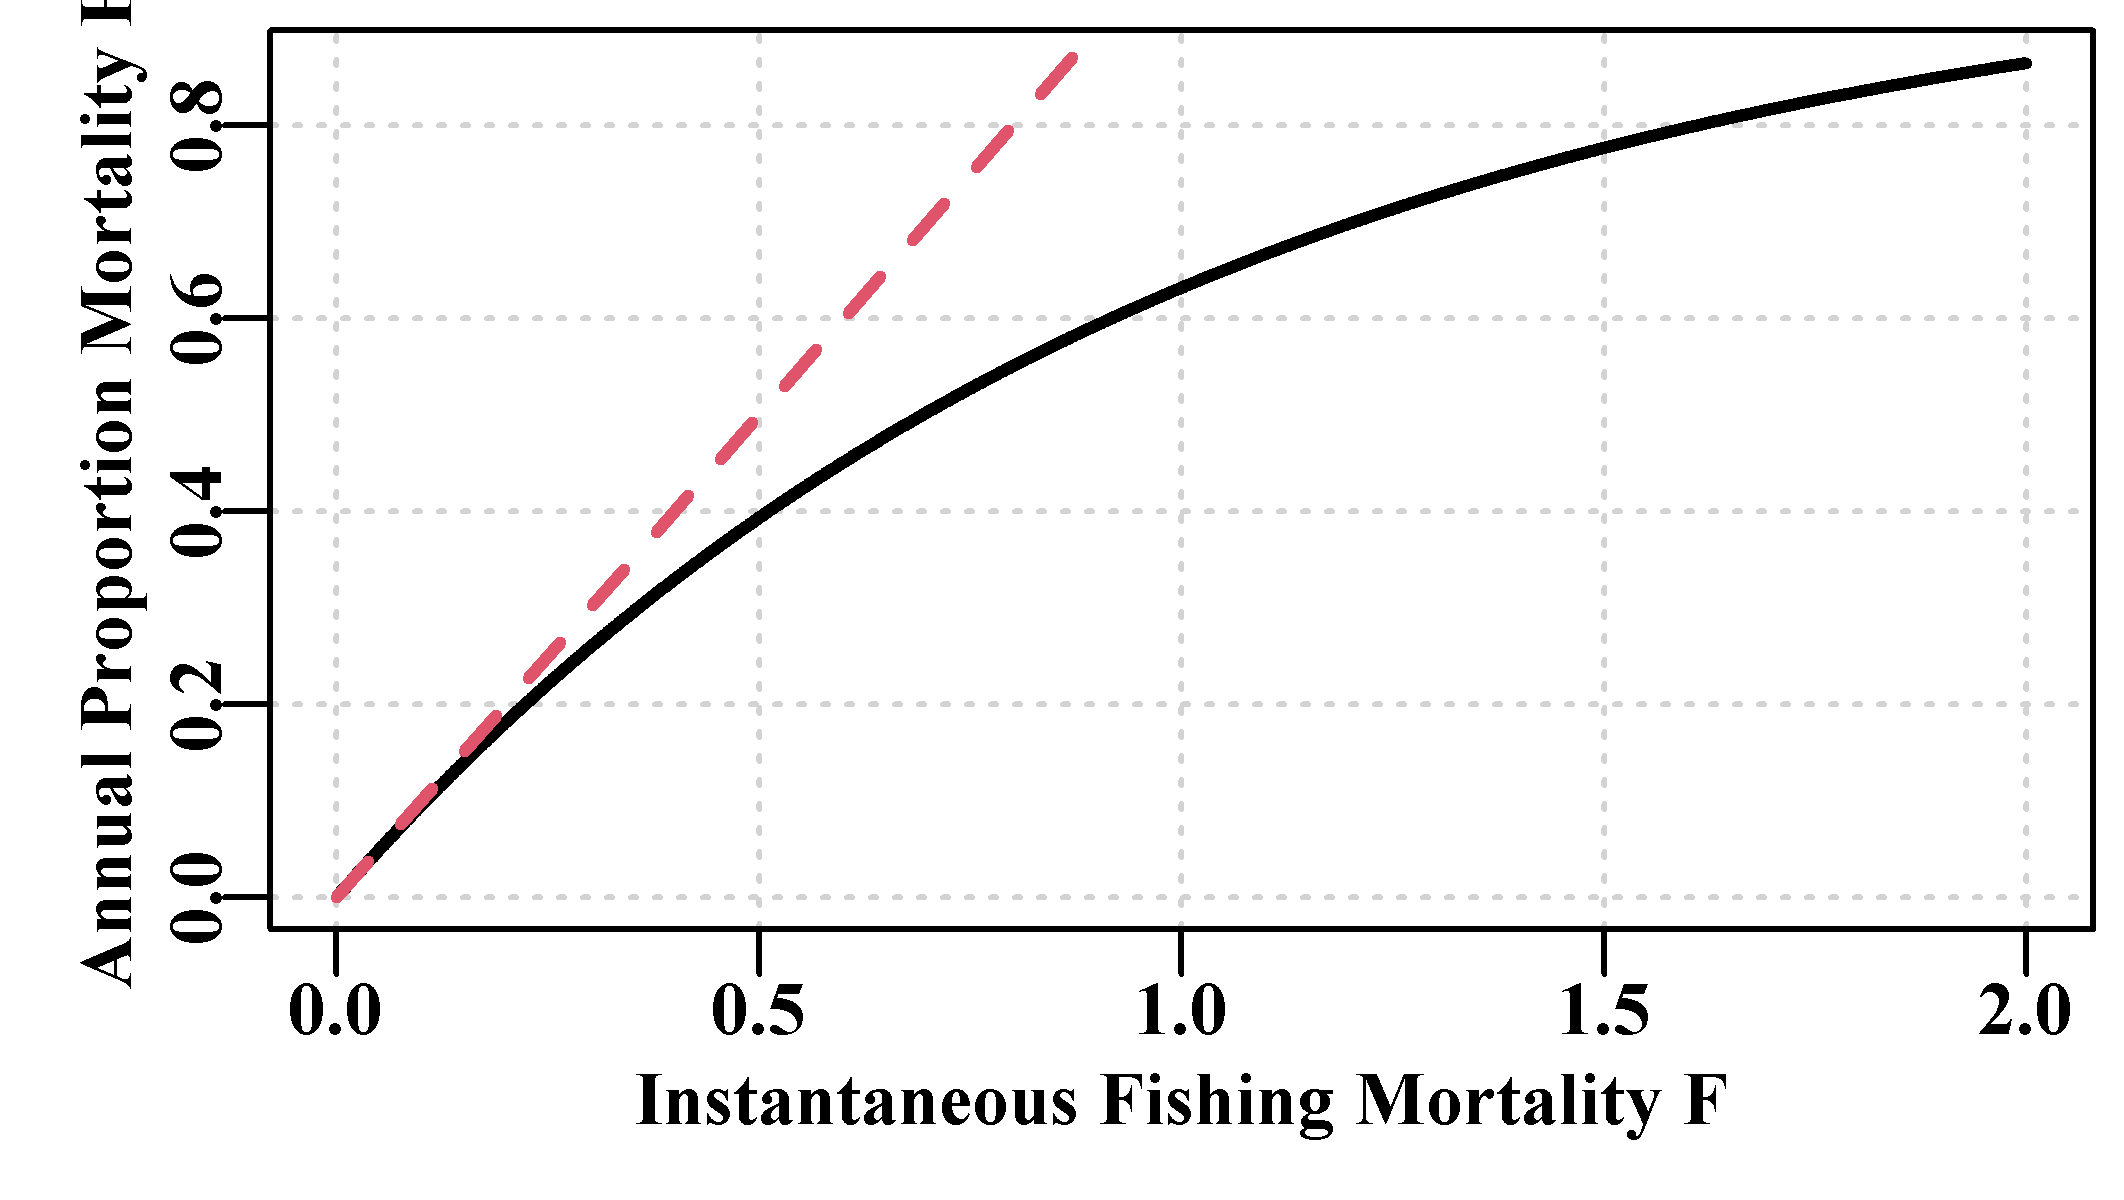 The relationship between the instantaneous fishing mortality rate (solid line) and the annual fishing mortality or annual harvest rate (dashed line). The values diverge at values of F greater than about 0.2.